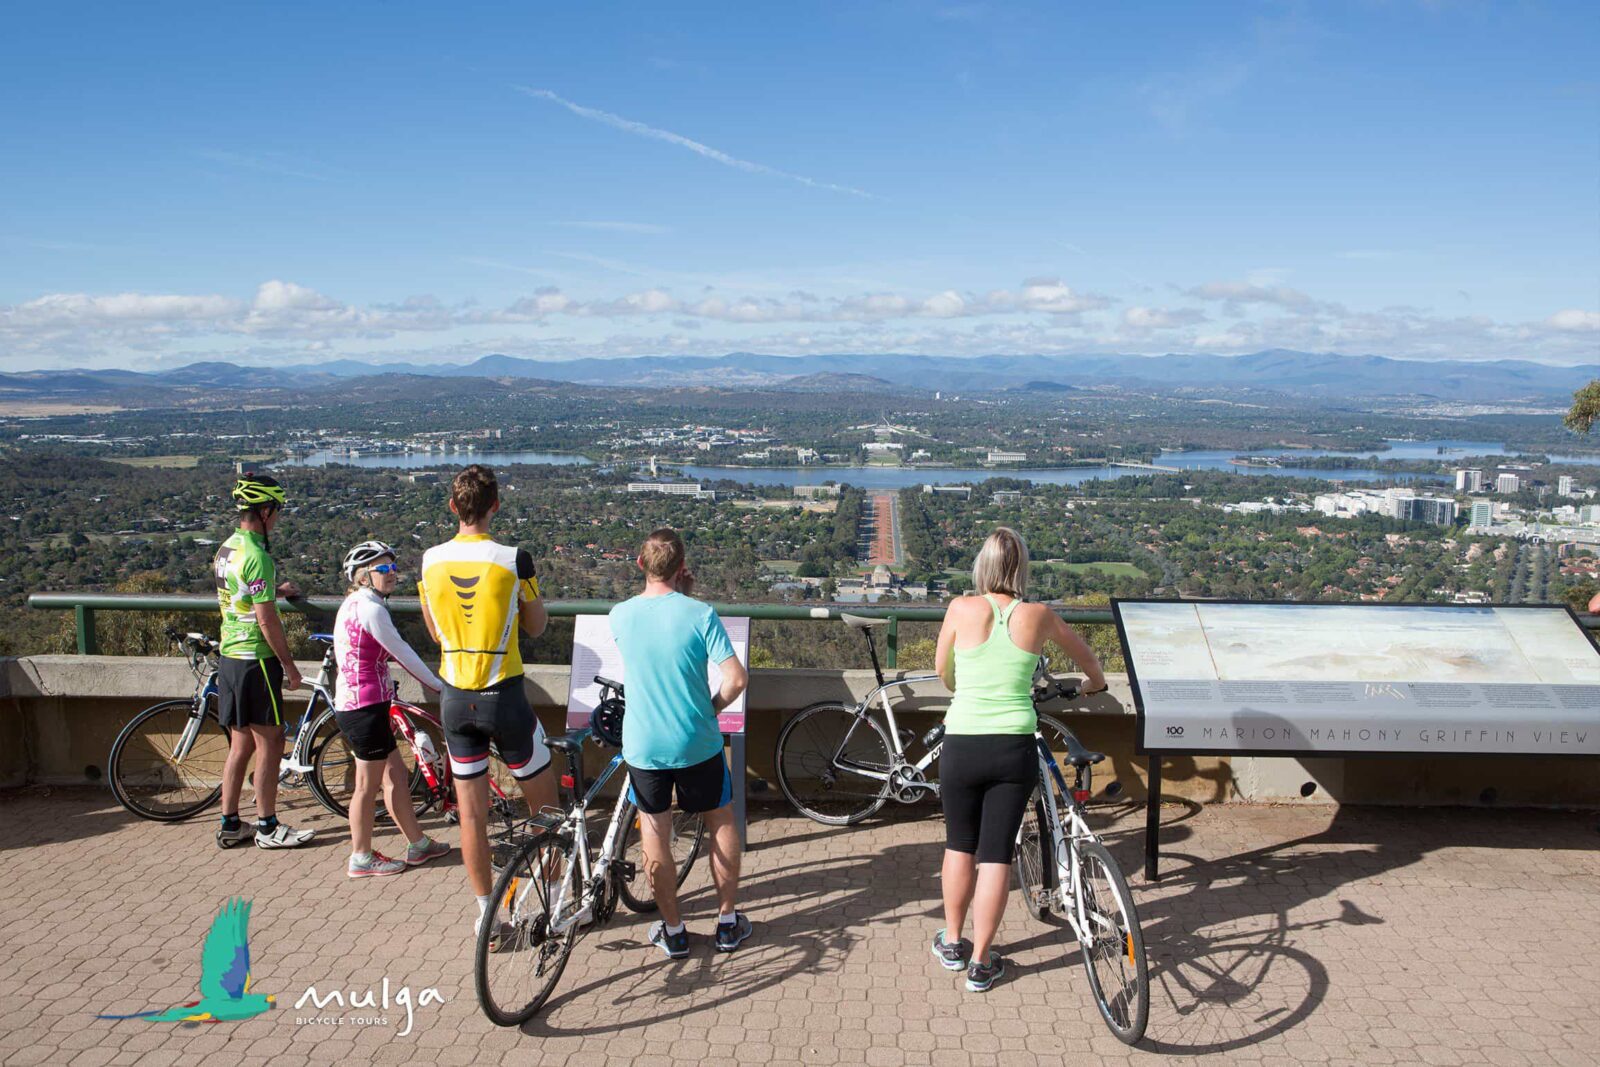 5 cyclists stand with their bikes behind the Marion Mahony Griffin View handrail.